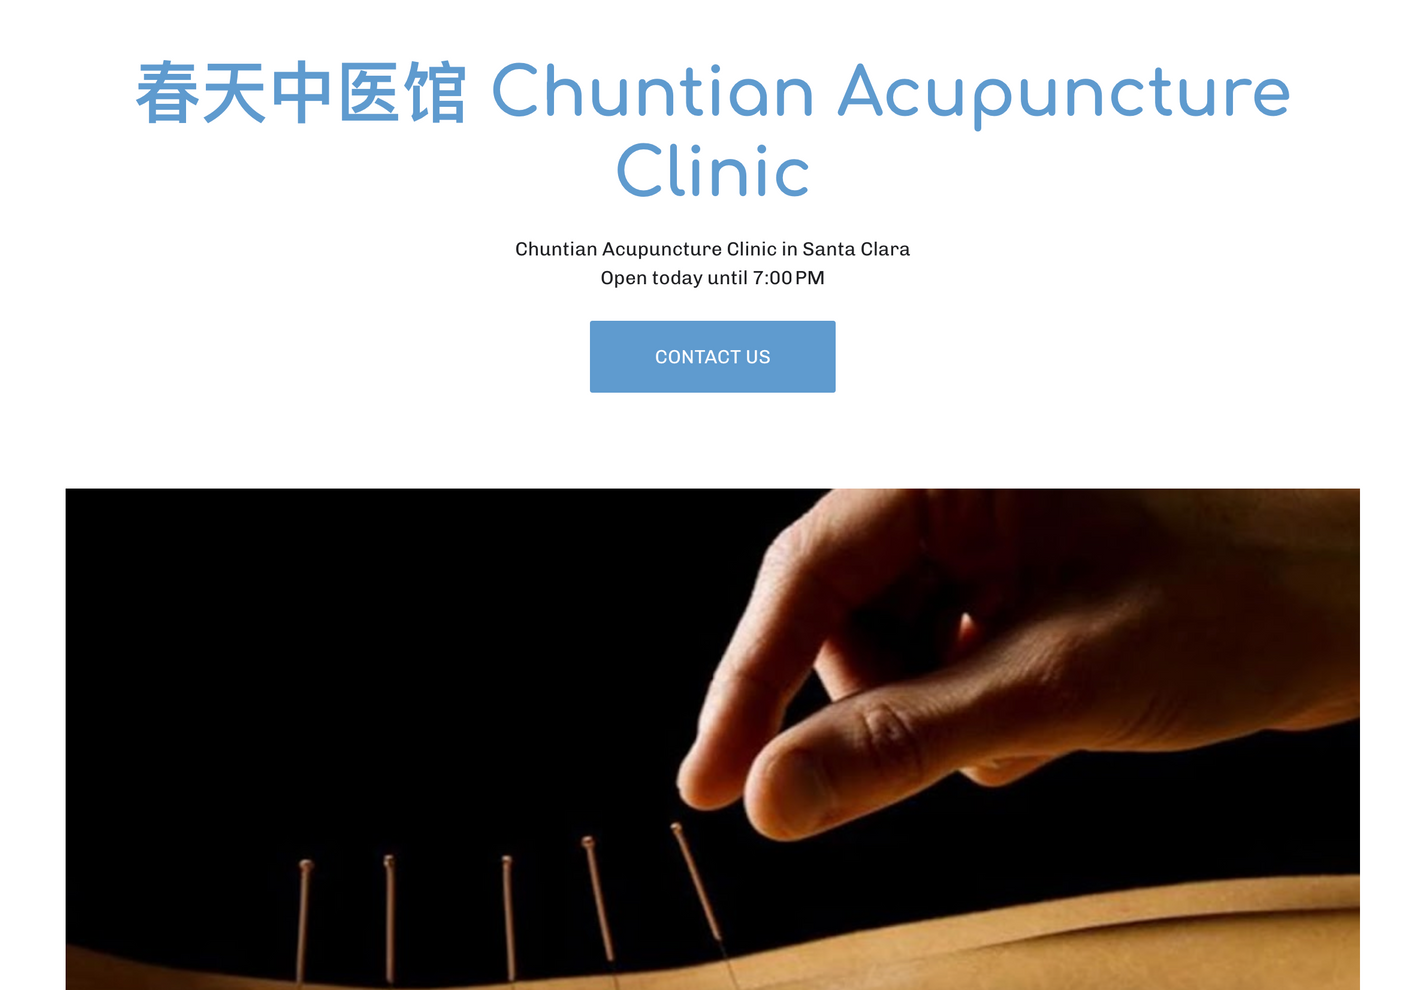 a website for chuntian acupuncture clinic open today until 7:30 pm